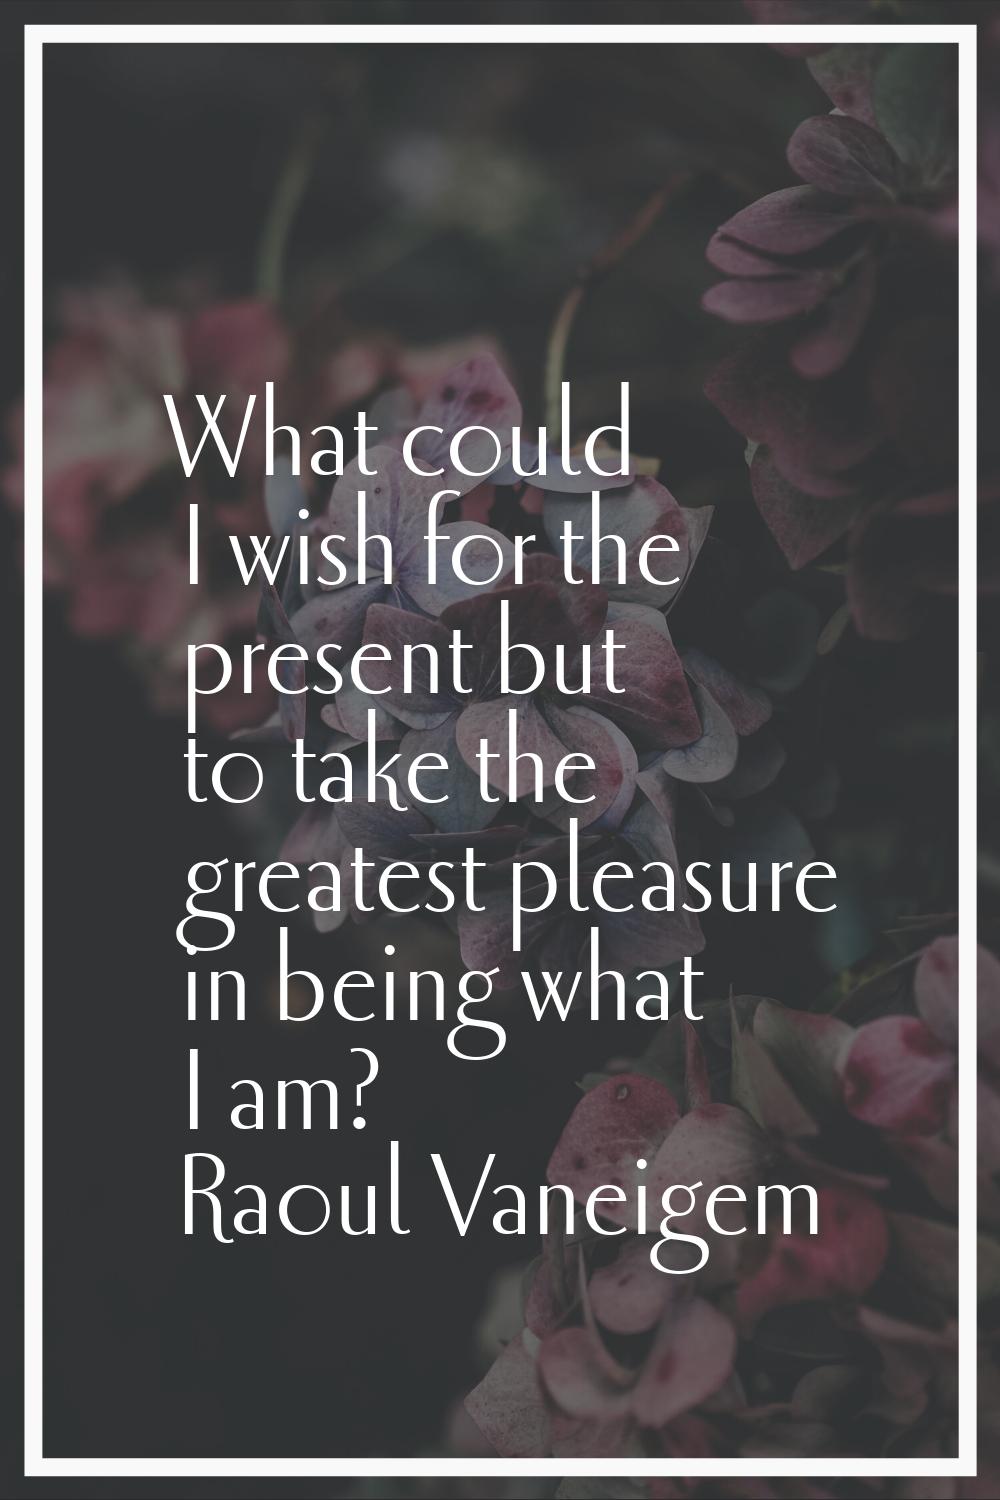 What could I wish for the present but to take the greatest pleasure in being what I am?